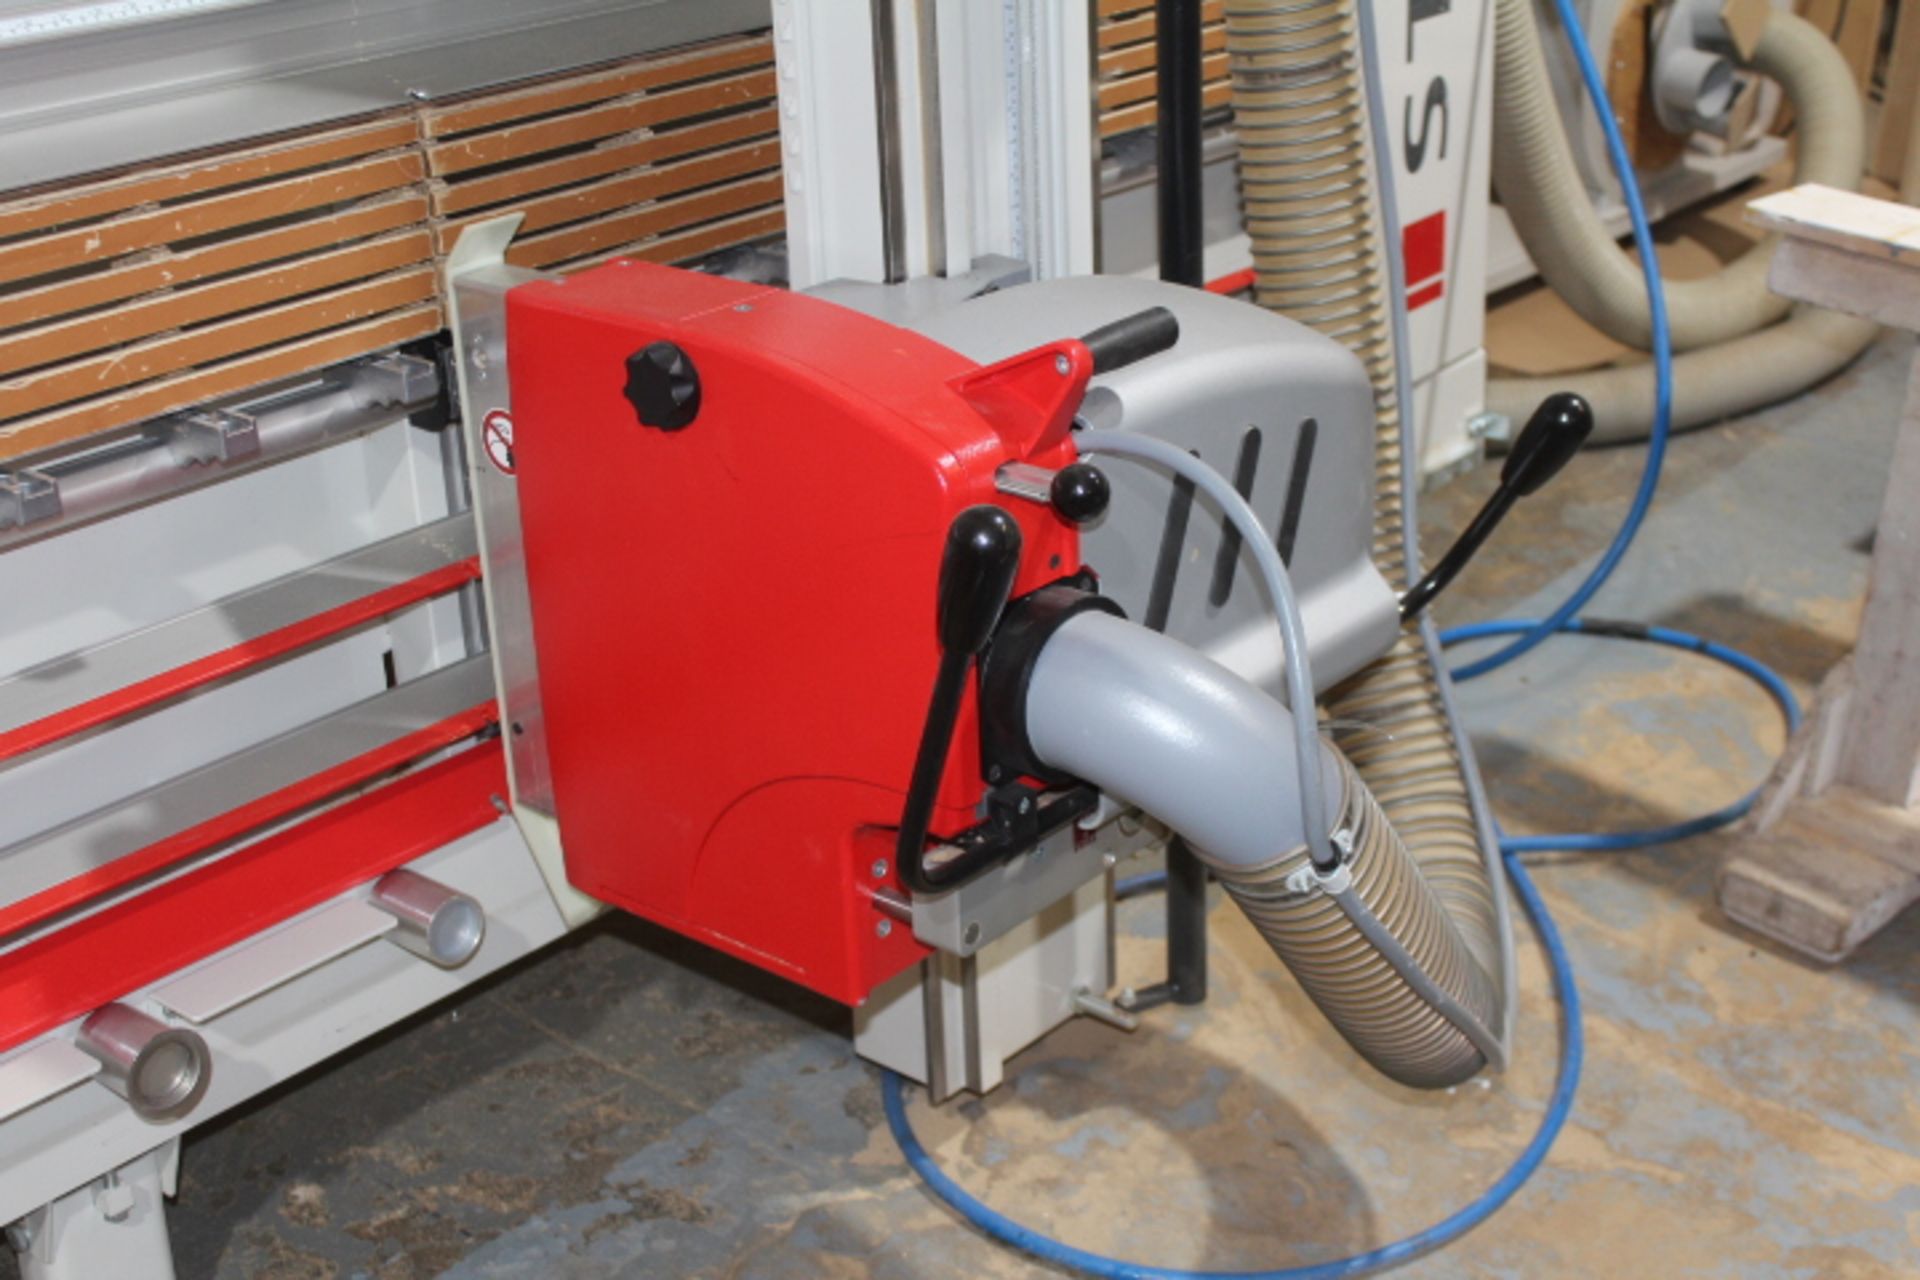 2019 STRIEBIG COMPACT II VERTICAL PANEL CIRCULAR SAW, S/N 47693, TYPE 4164, 480 V, 60 HZ, 3.0 KW, 9. - Image 3 of 5